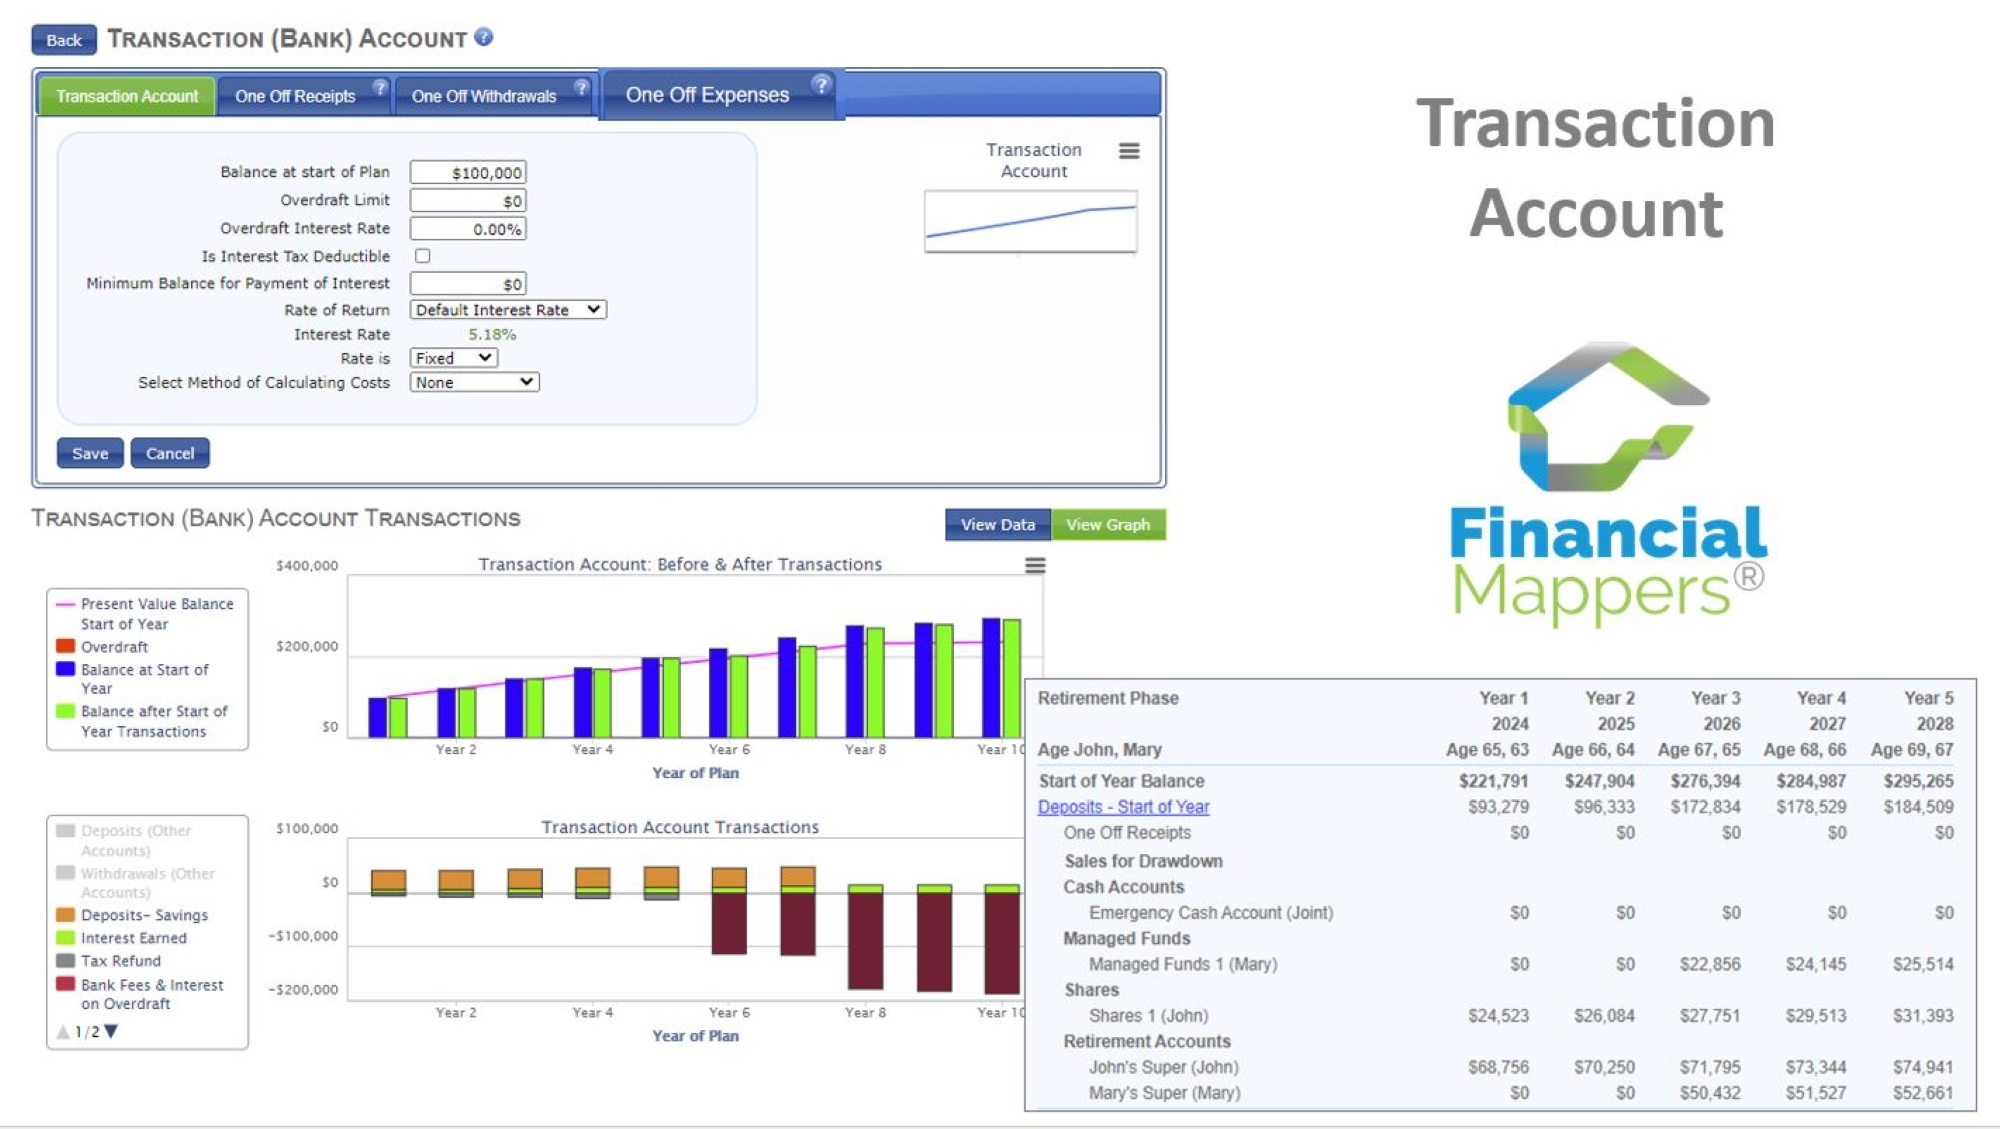 Screenshot Financial Mappers cash flow modelling software. Transaction Account processes all investment transactions, including home ownership and Superannuation.